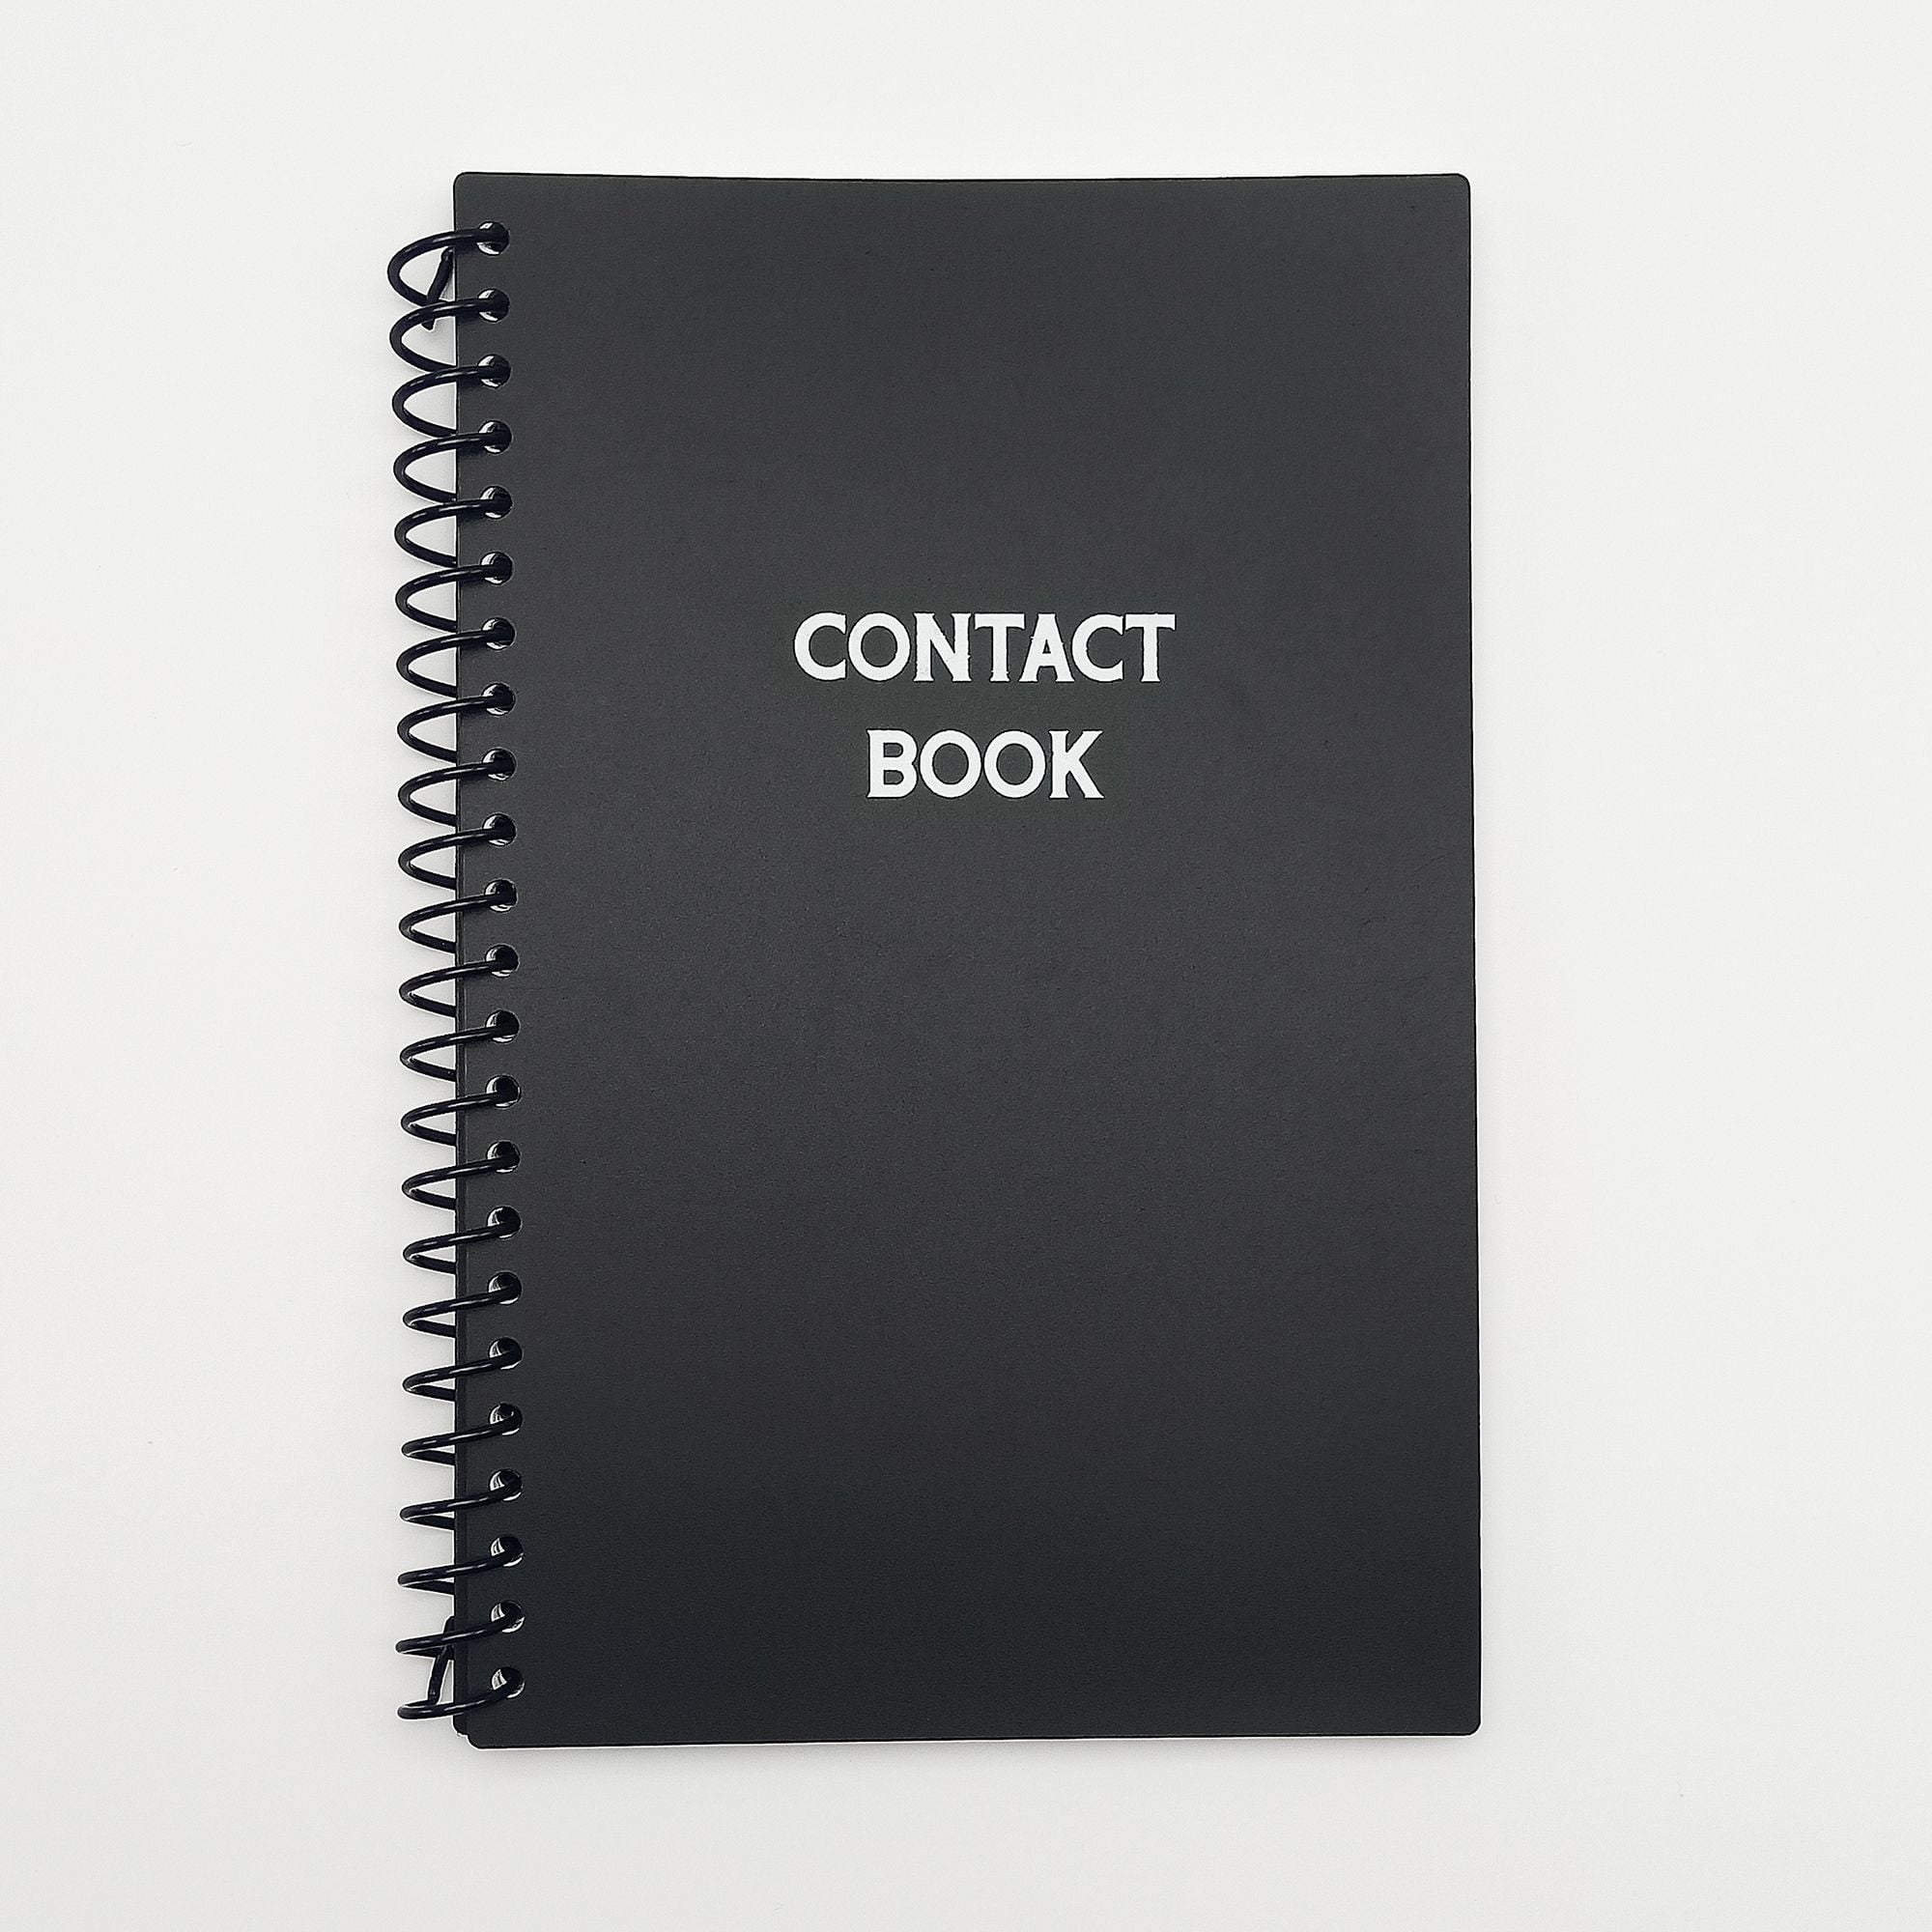 Pen and Gear Black Contact Book